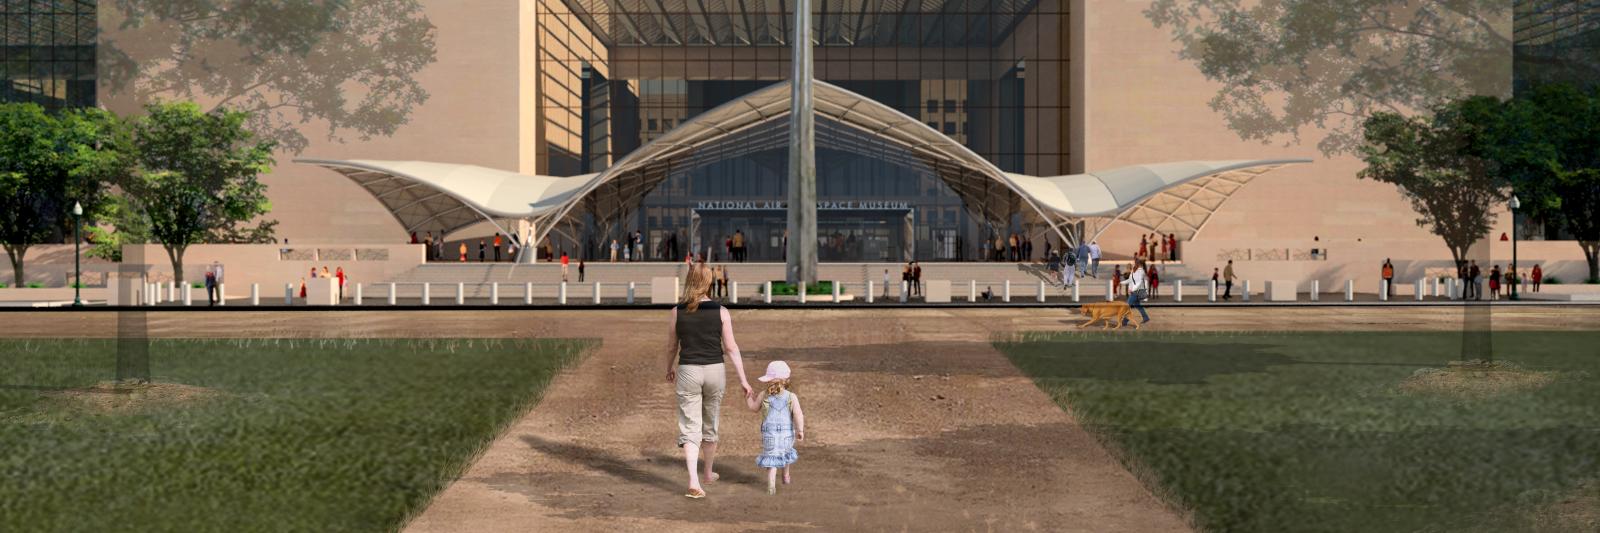 Artist Rendering Smithsonian's National Air and Space Museum